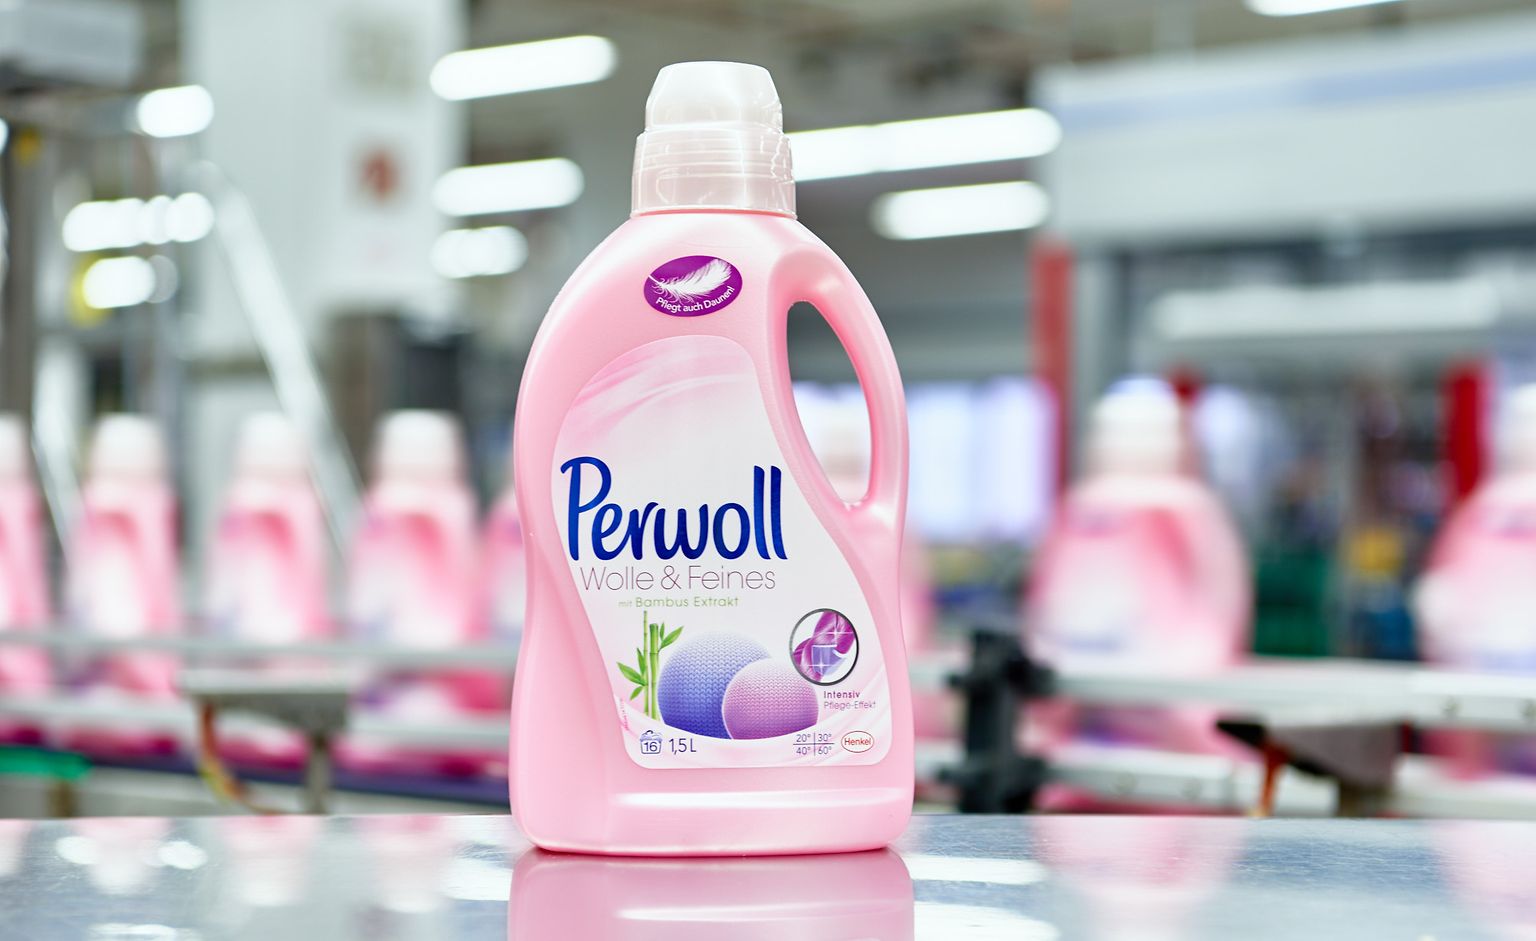 
For the first time in Germany, 15% recycled material was used for the packaging of Perwoll Wolle & Feines (Perwoll Wool & Delicates) - a big step towards sustainable packaging and a circular economy.
